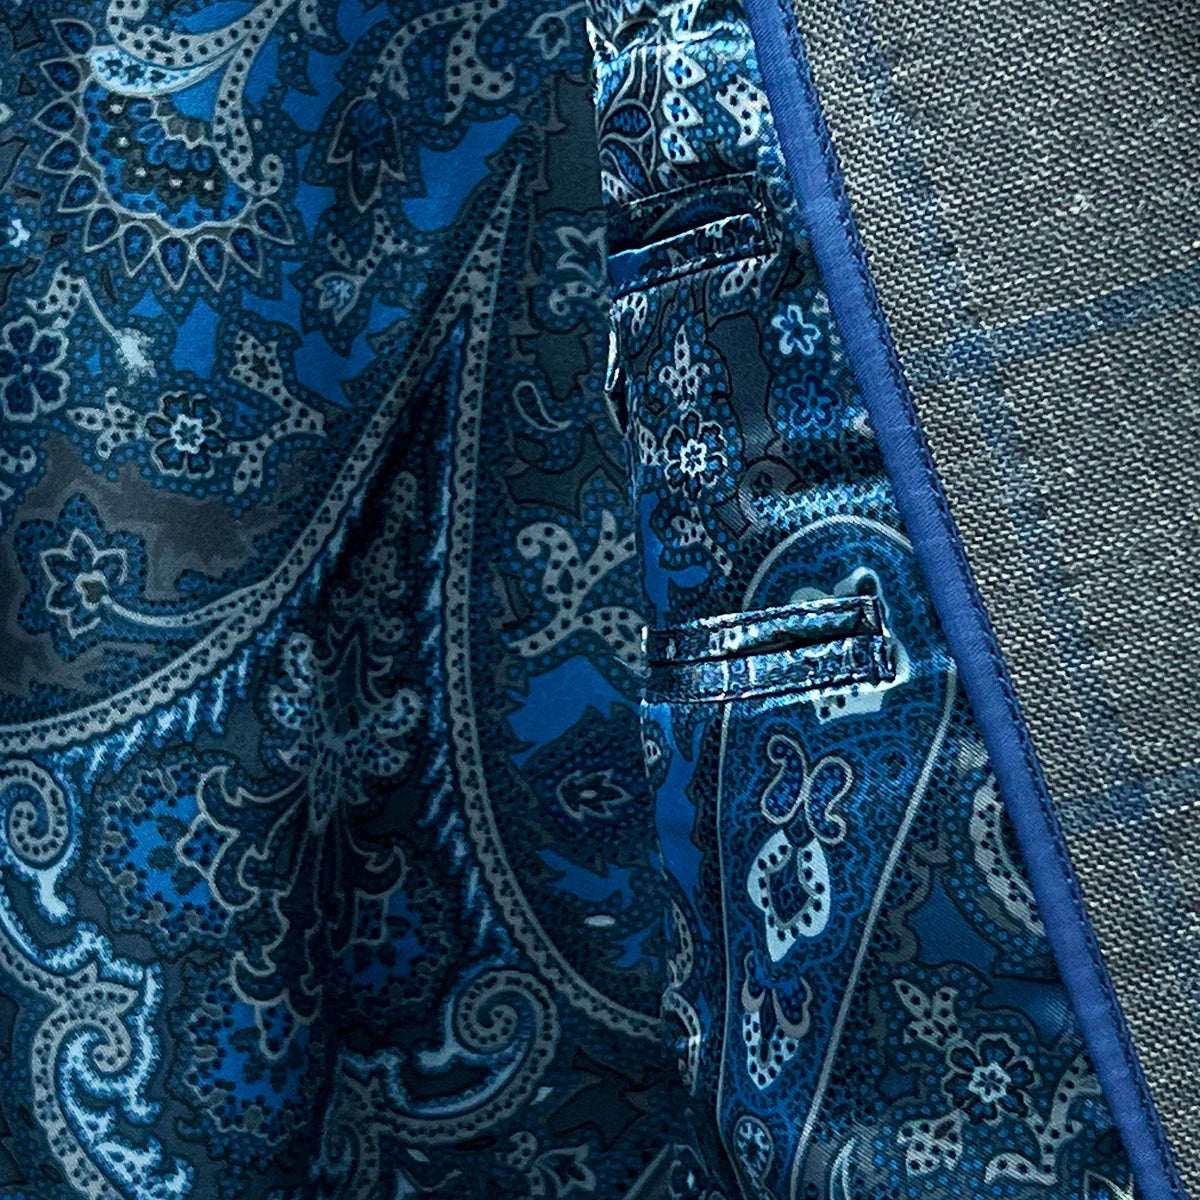 Inside view showcasing the flash linings of the Westwood Hart grey with medium blue windowpane men's sport coat.